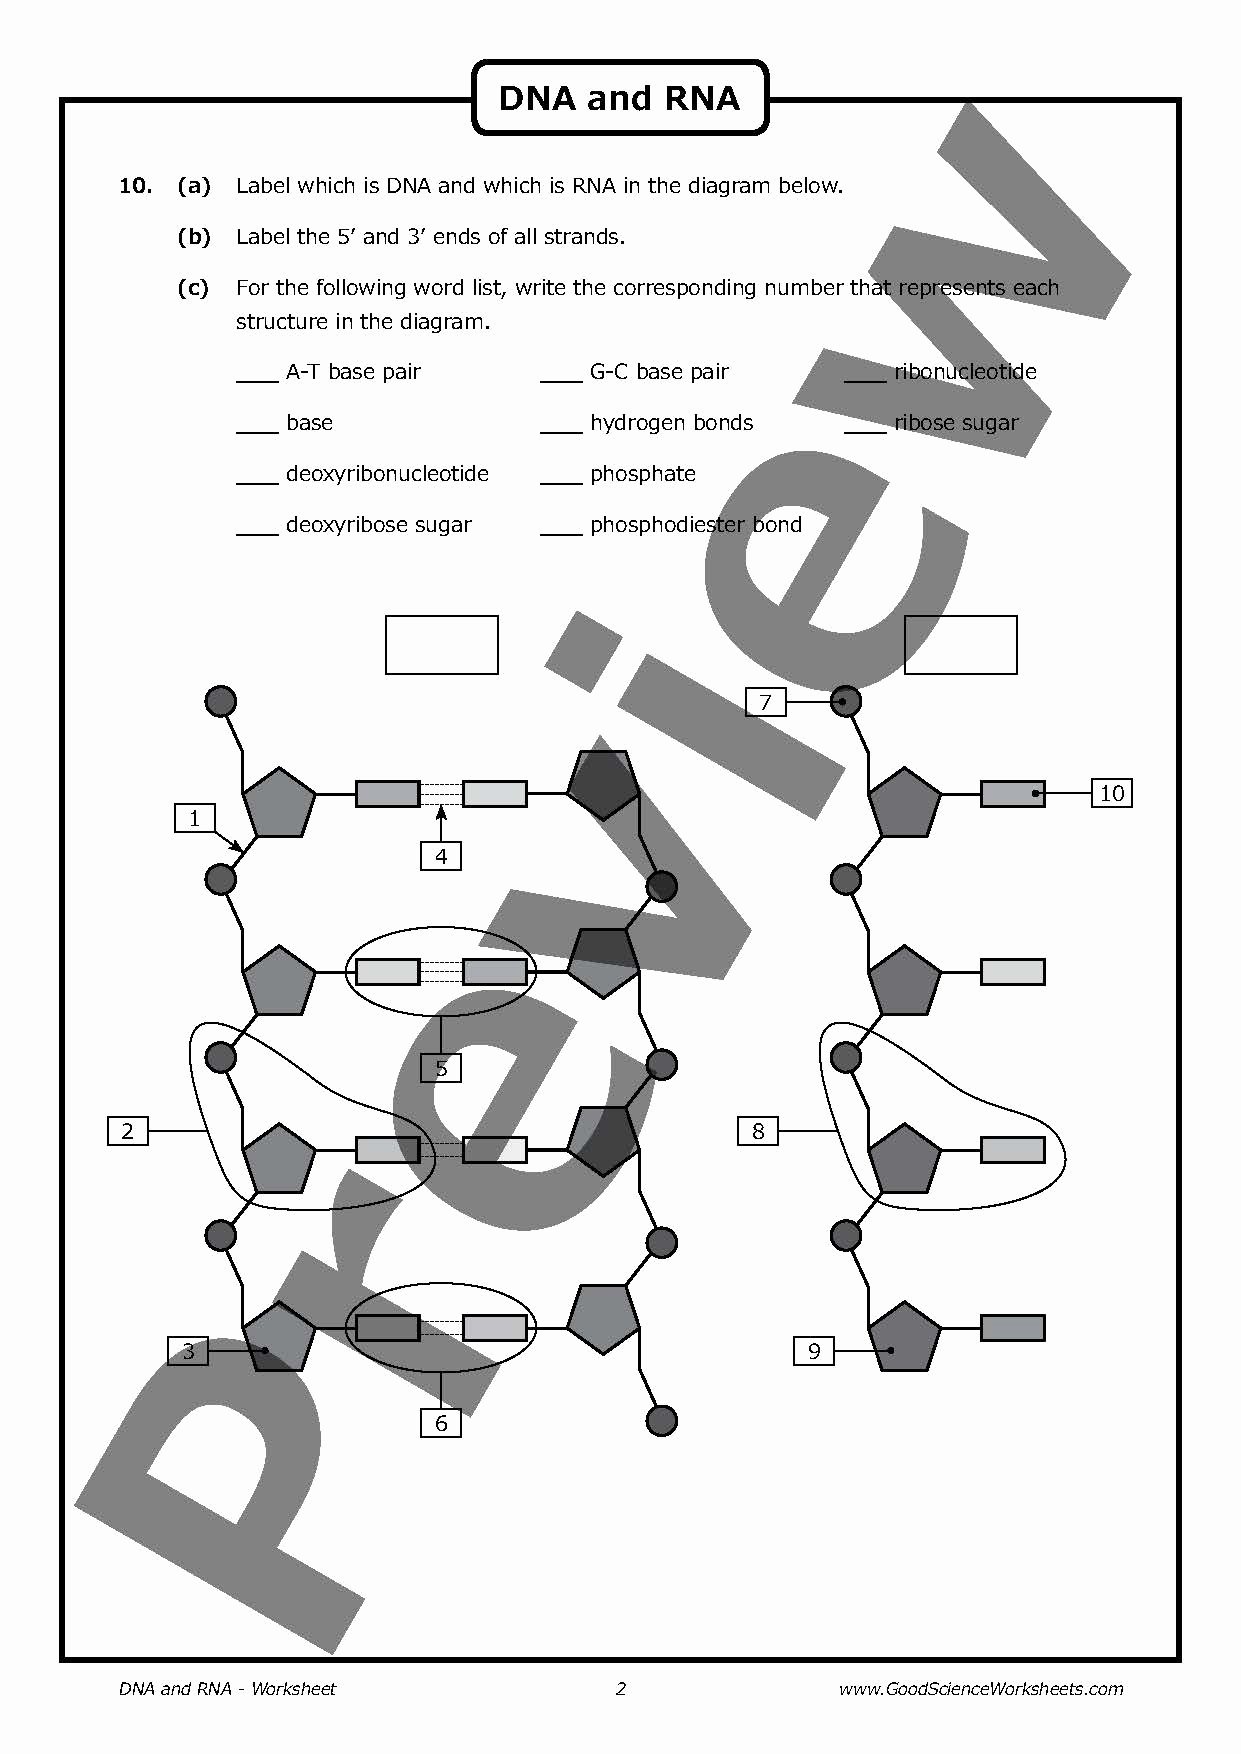 Dna and Rna Worksheet Elegant Dna Structure Drawing at Getdrawings